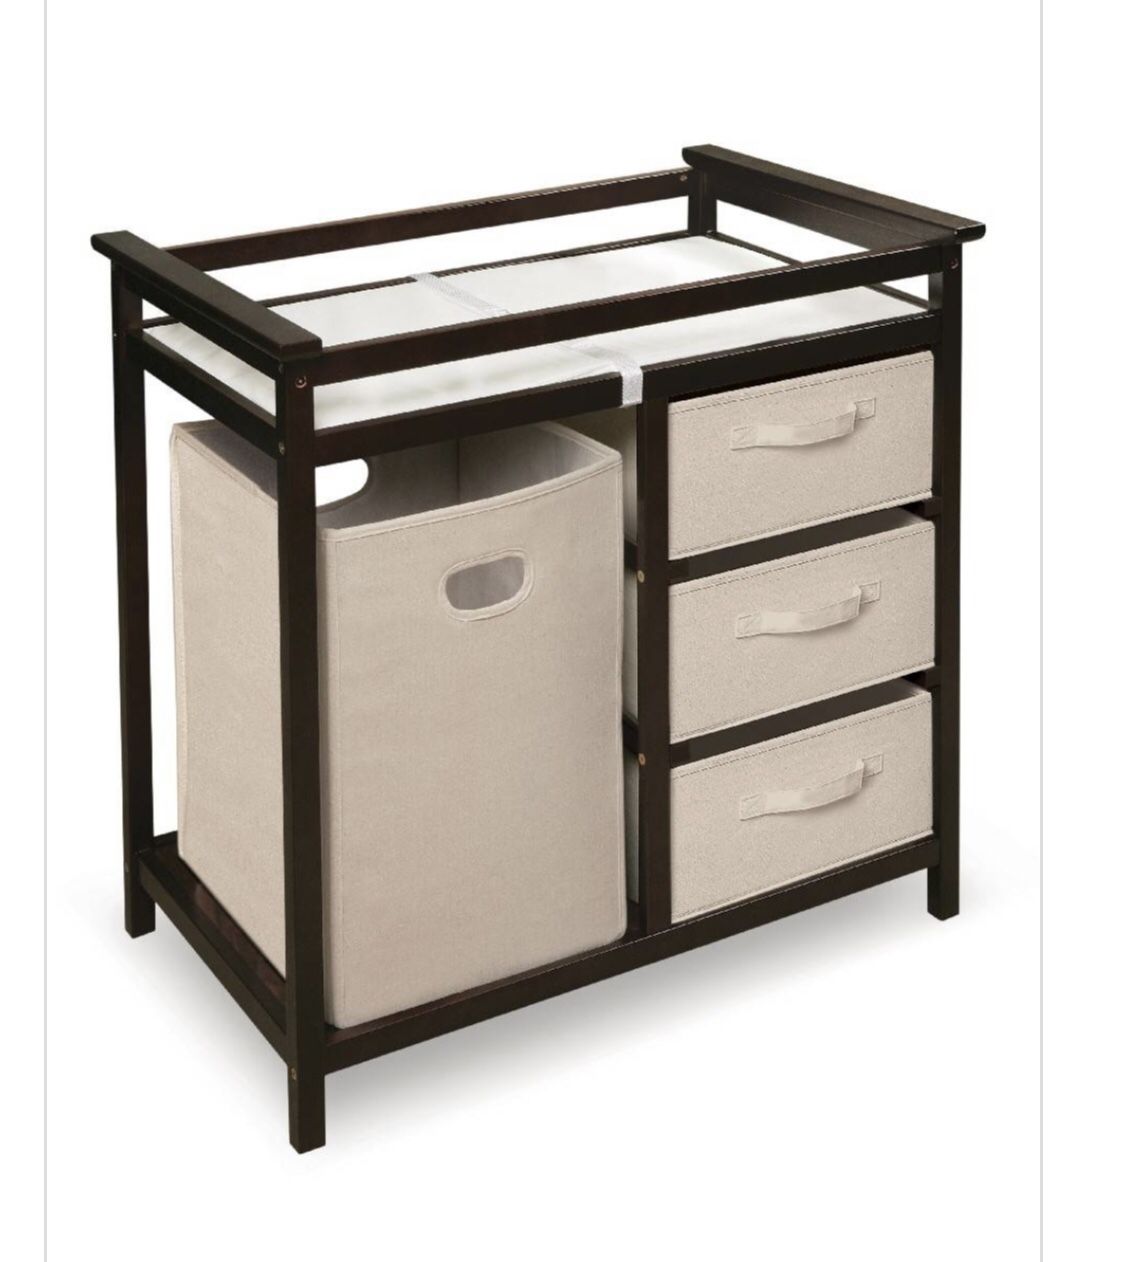 $80 *BRAND NEW* Modern Baby Changing Table 